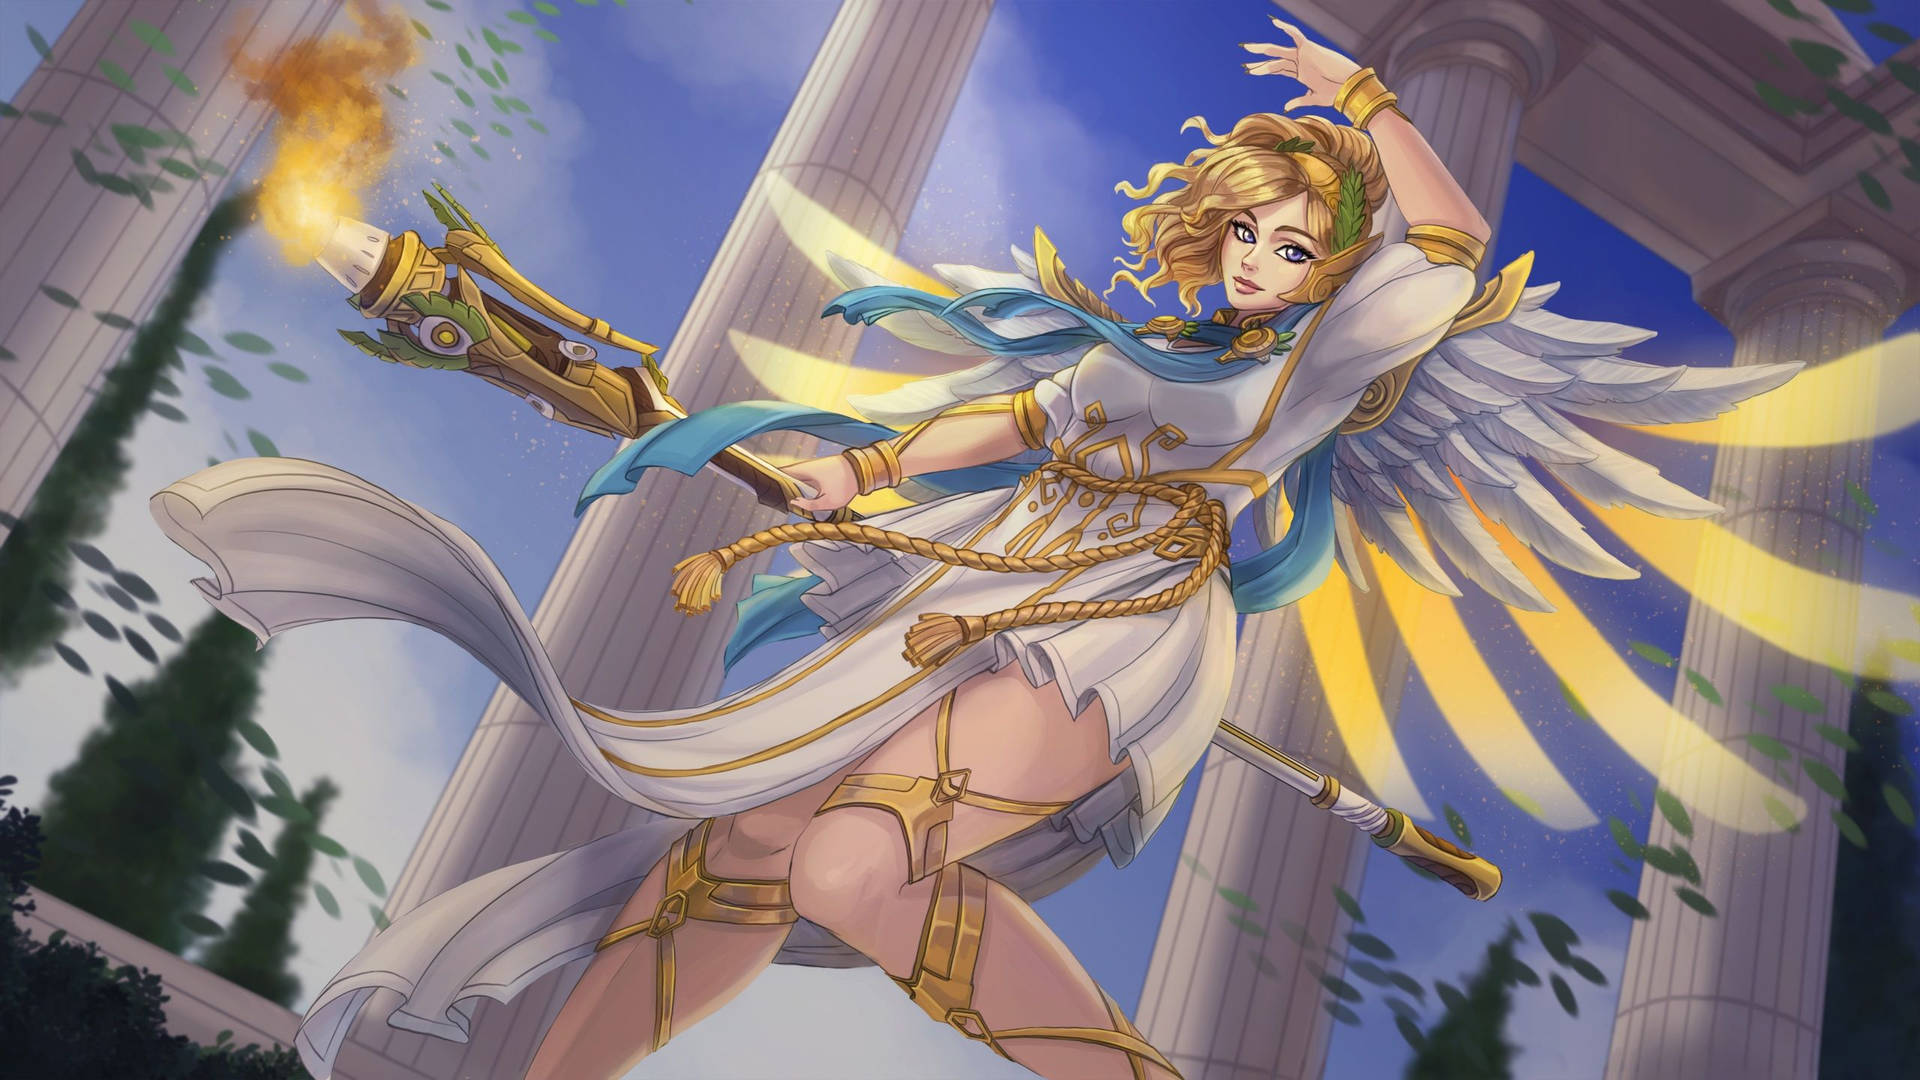 Explore the world with Mercy, the goddess of compassion. Wallpaper